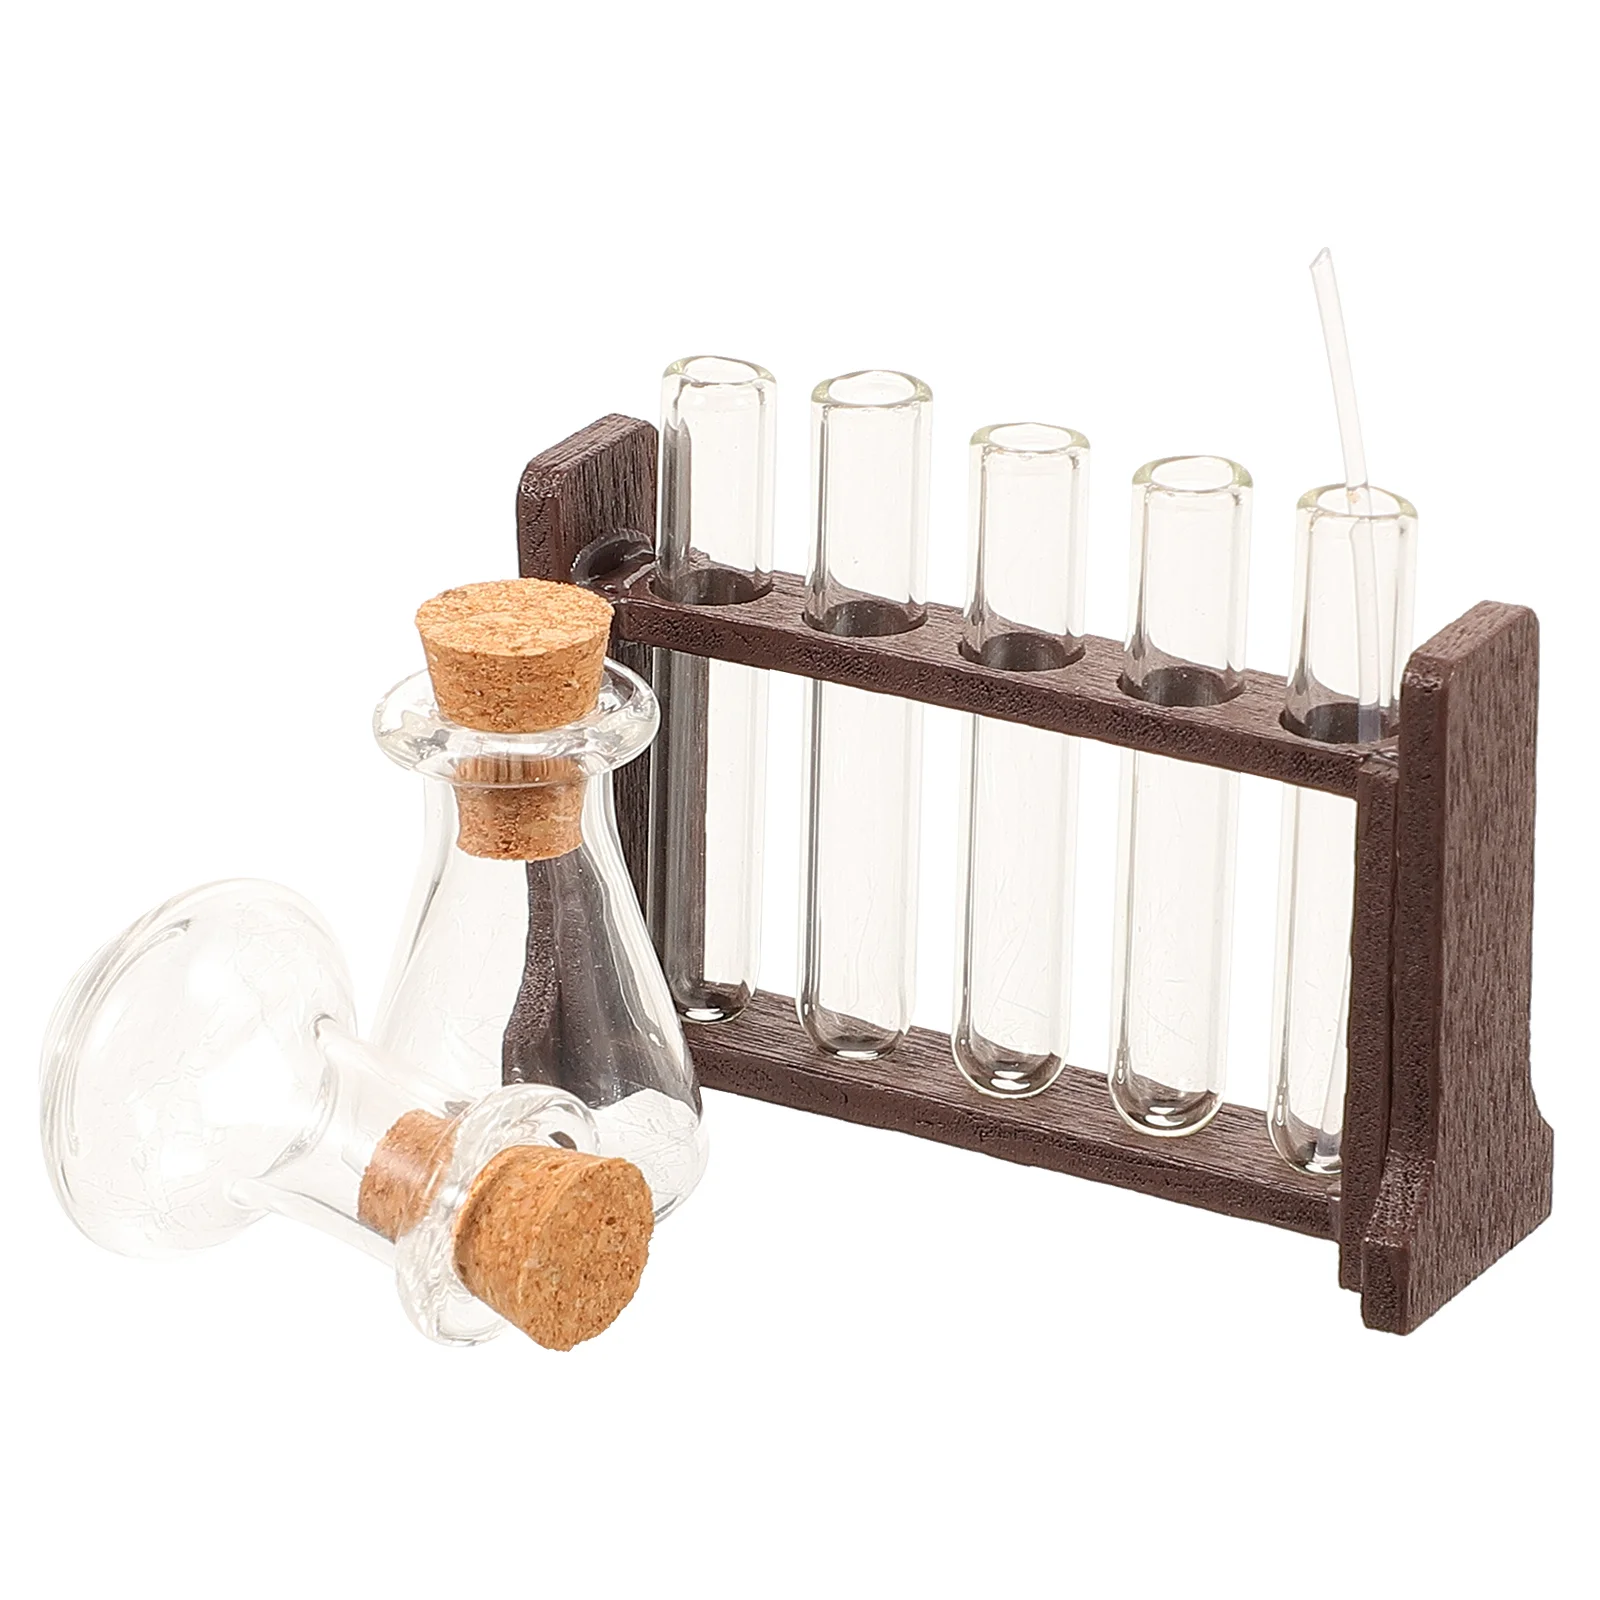 

Childrens Laboratory Toy For House Tube Rack Landscape Prop Simulation Test Laboratory House Science Experiment